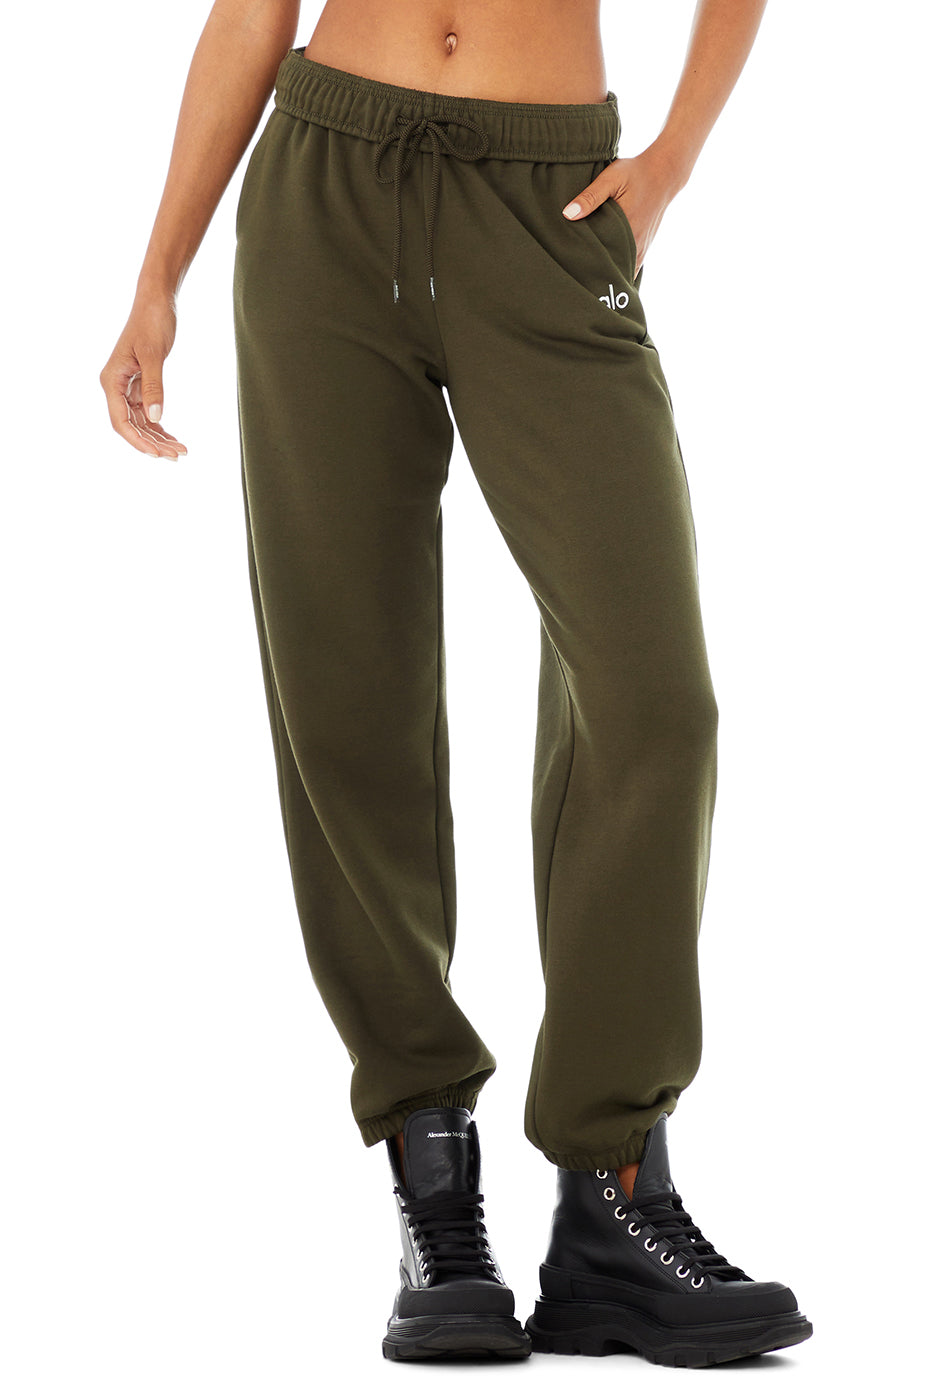 Accolade Sweatpant in Dark Olive by Alo Yoga